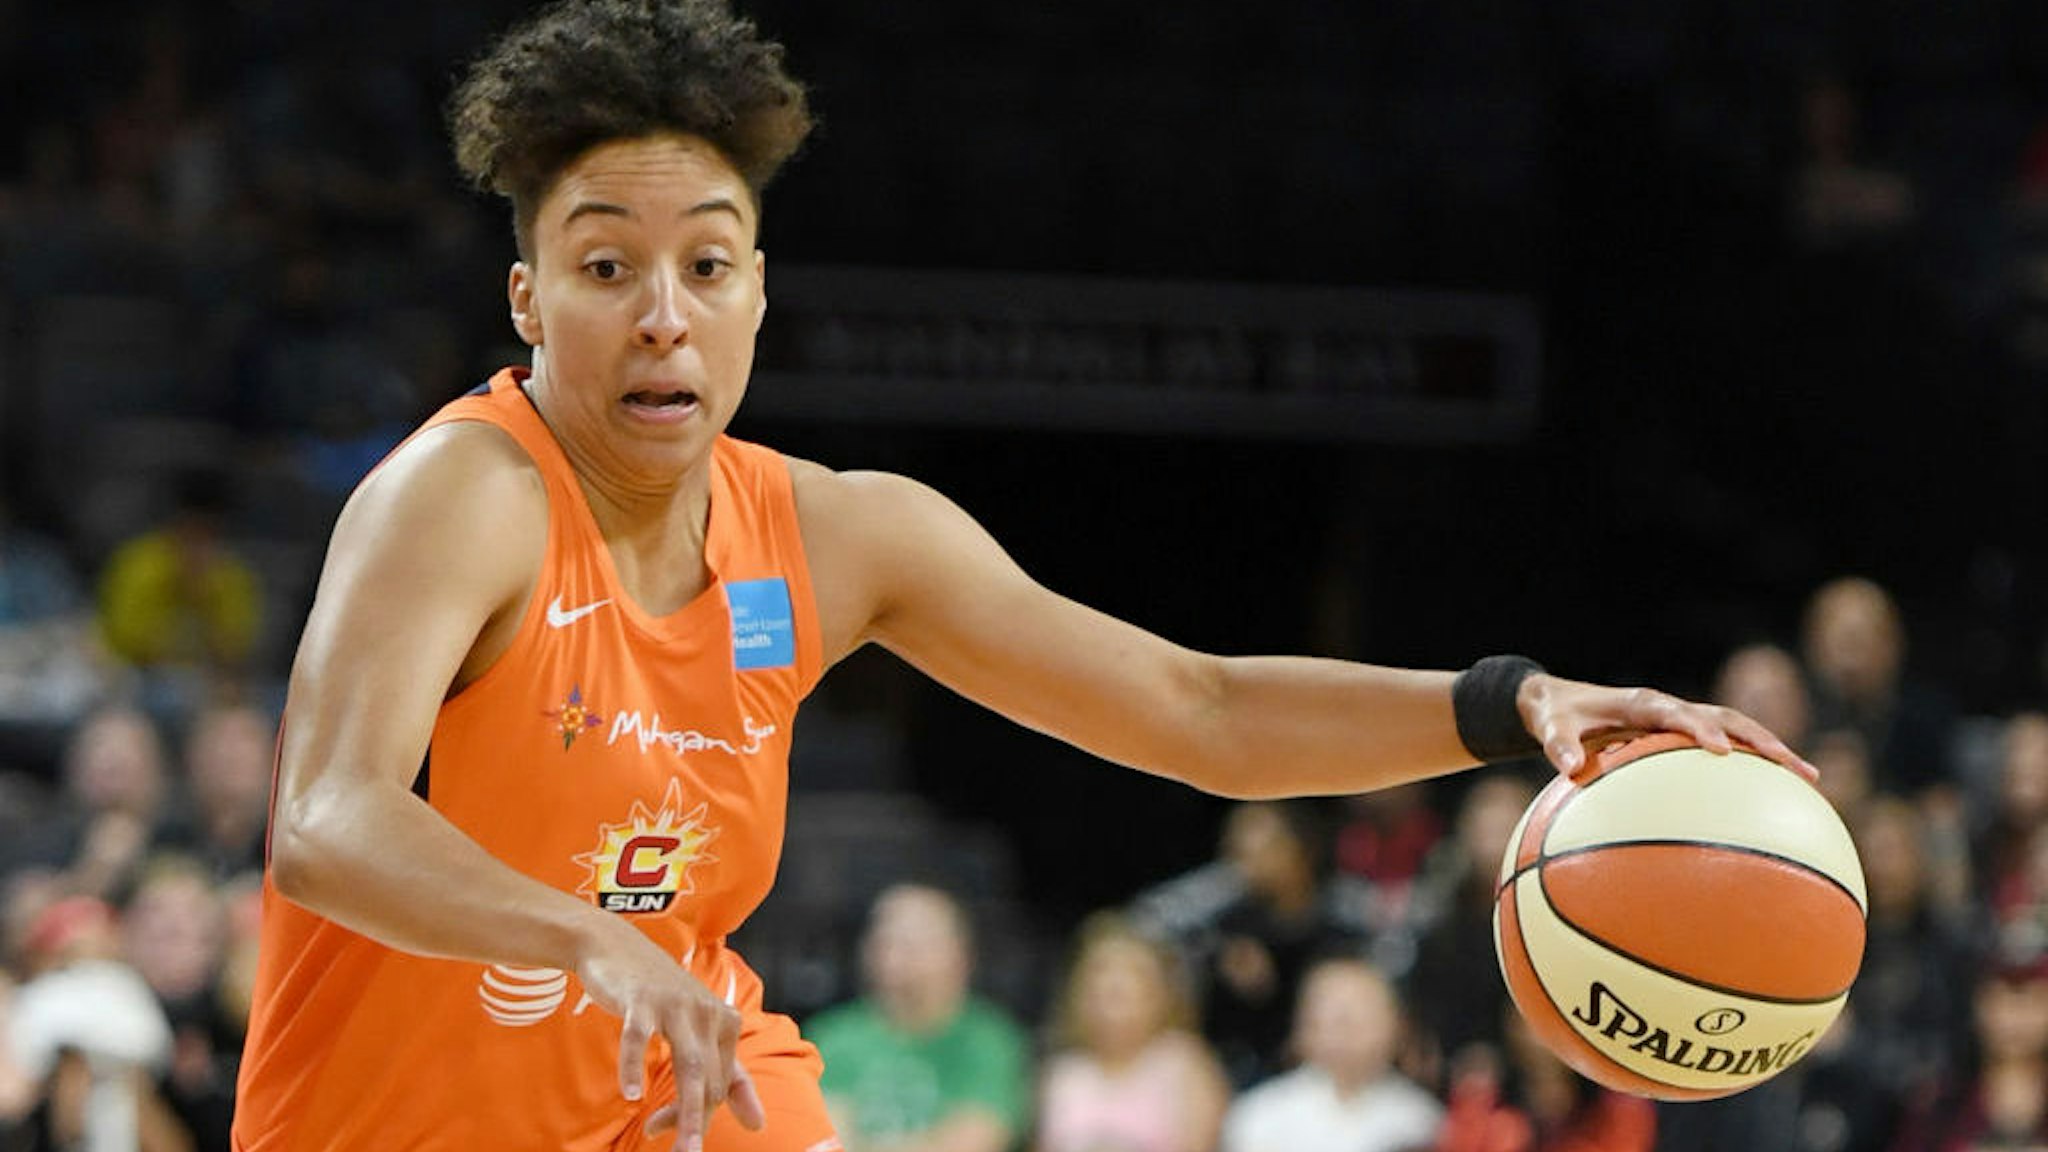 LAS VEGAS, NEVADA - JUNE 02: Layshia Clarendon #23 of the Connecticut Sun drives against the Las Vegas Aces during their game at the Mandalay Bay Events Center on June 2, 2019 in Las Vegas, Nevada. The Sun defeated the Aces 80-74. NOTE TO USER: User expressly acknowledges and agrees that, by downloading and or using this photograph, User is consenting to the terms and conditions of the Getty Images License Agreement. (Photo by Ethan Miller/Getty Images )